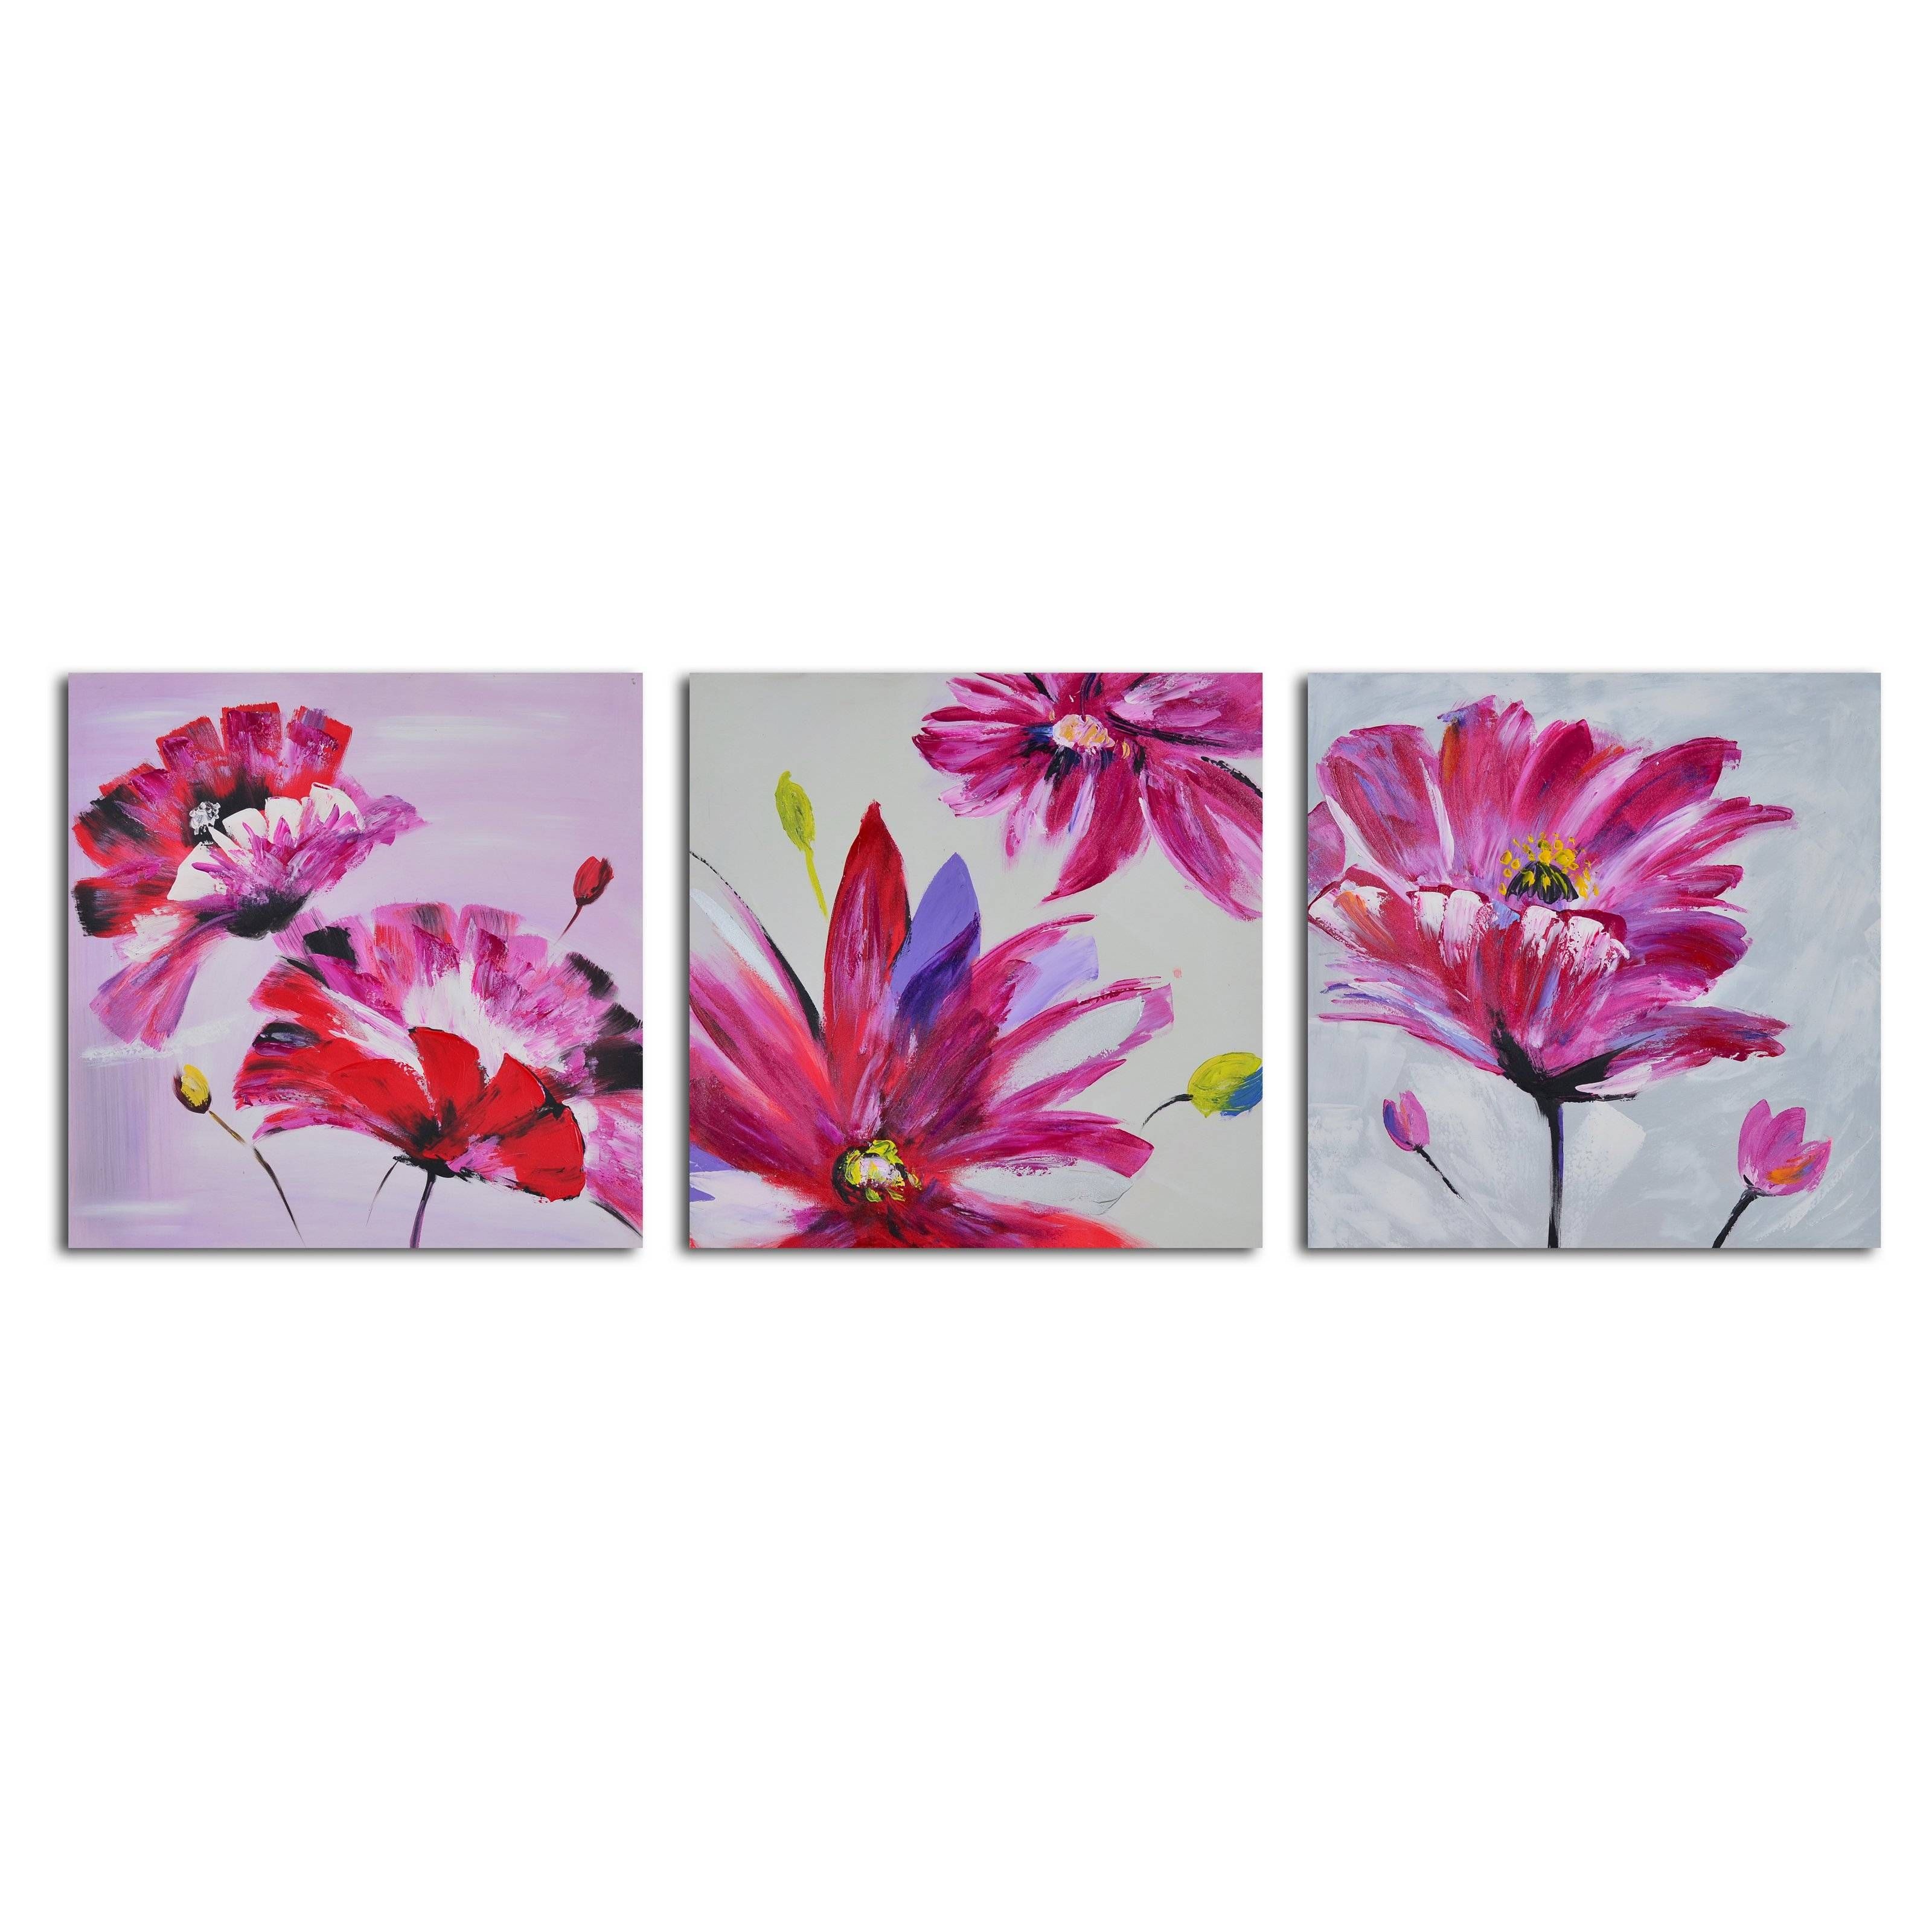 Frenzy Of Fuschia Florals 3 Piece Canvas Wall Art Set | Hayneedle With Regard To Best And Newest 3 Piece Floral Canvas Wall Art (View 1 of 20)